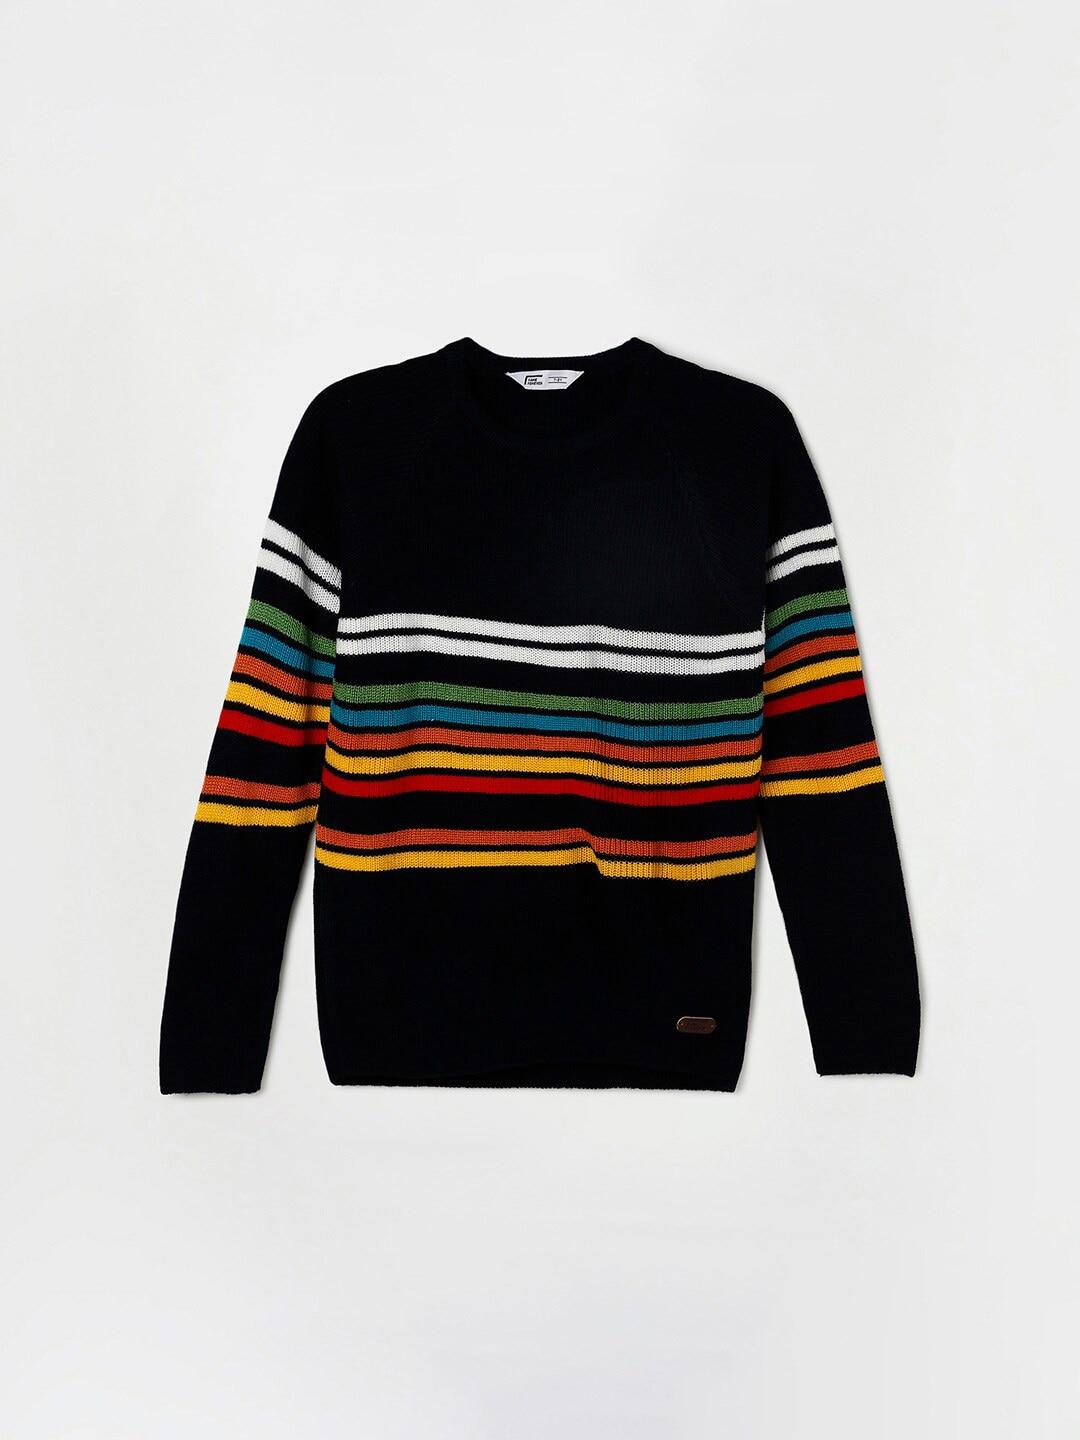 fame-forever-by-lifestyle-boys-navy-blue-&-white-striped-acrylic-pullover-sweater